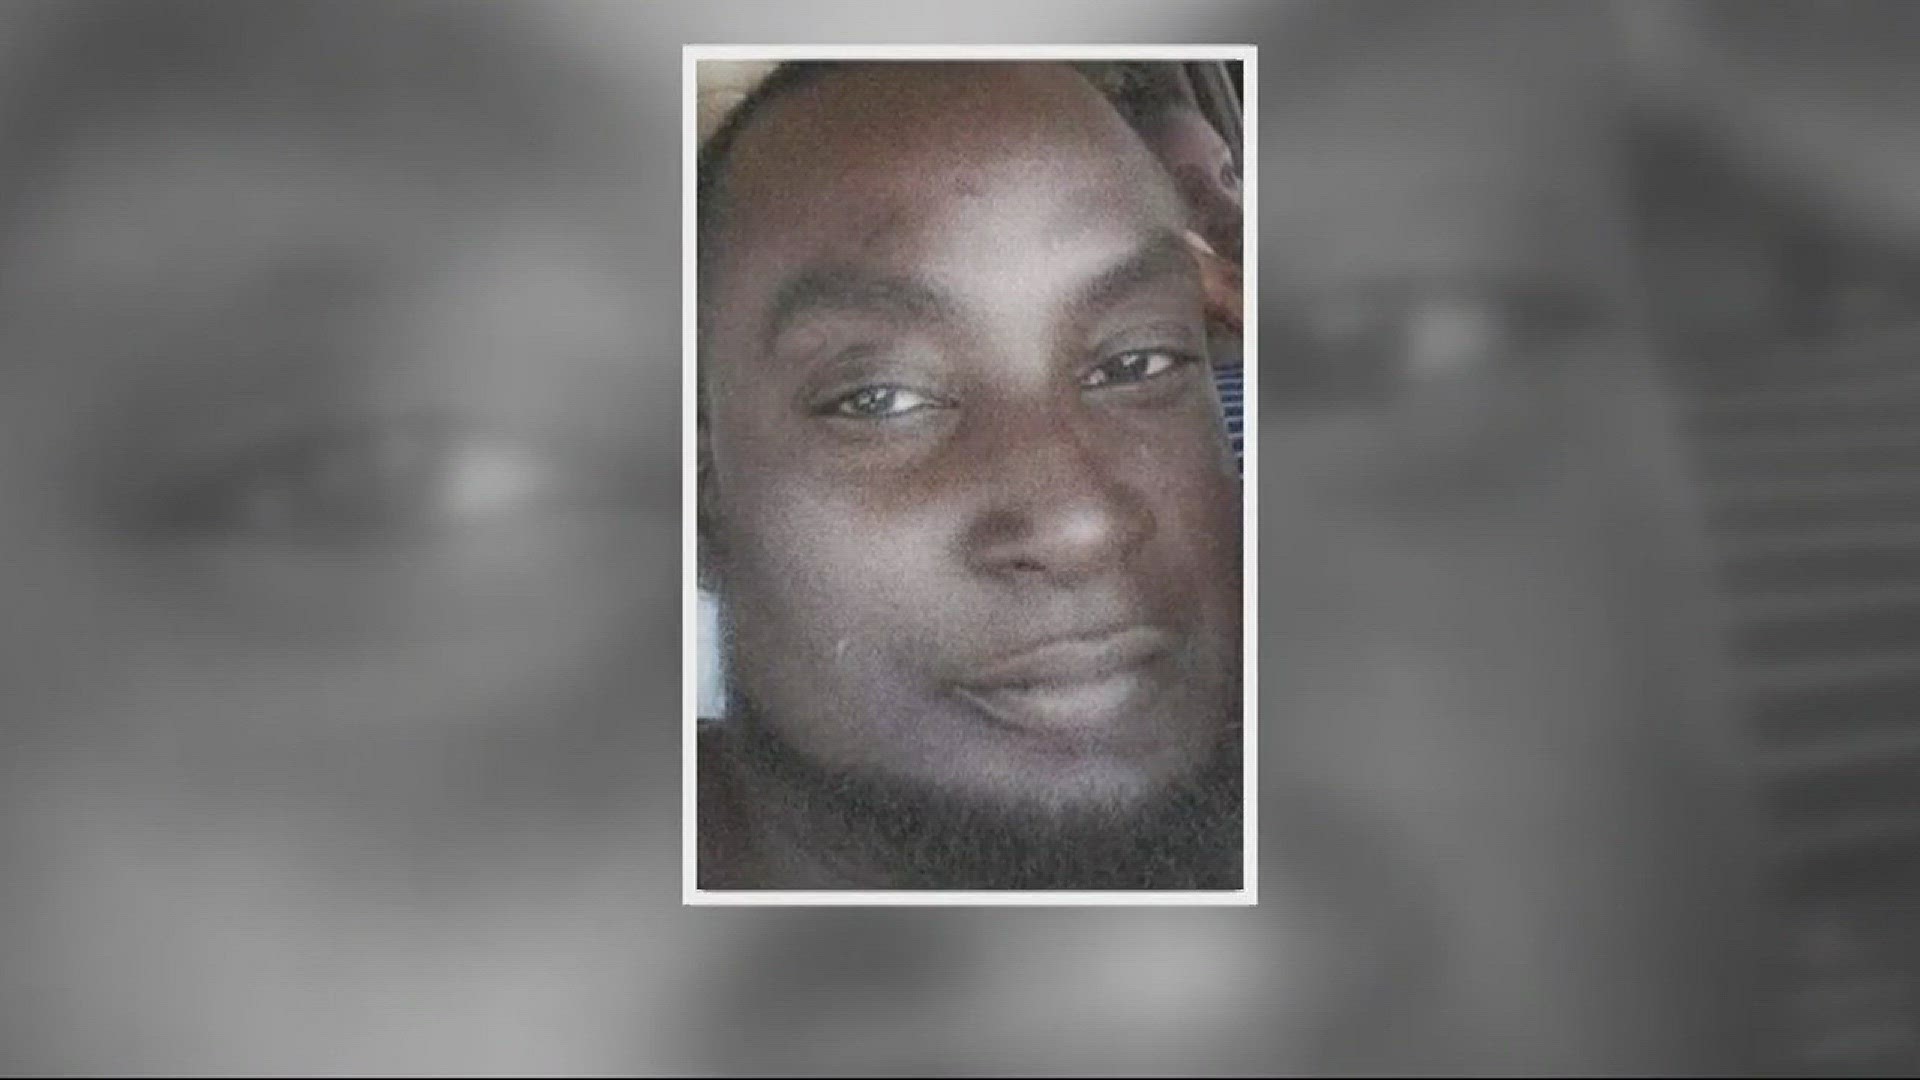 The police shooting of Keith Scott last September is under scrutiny again.